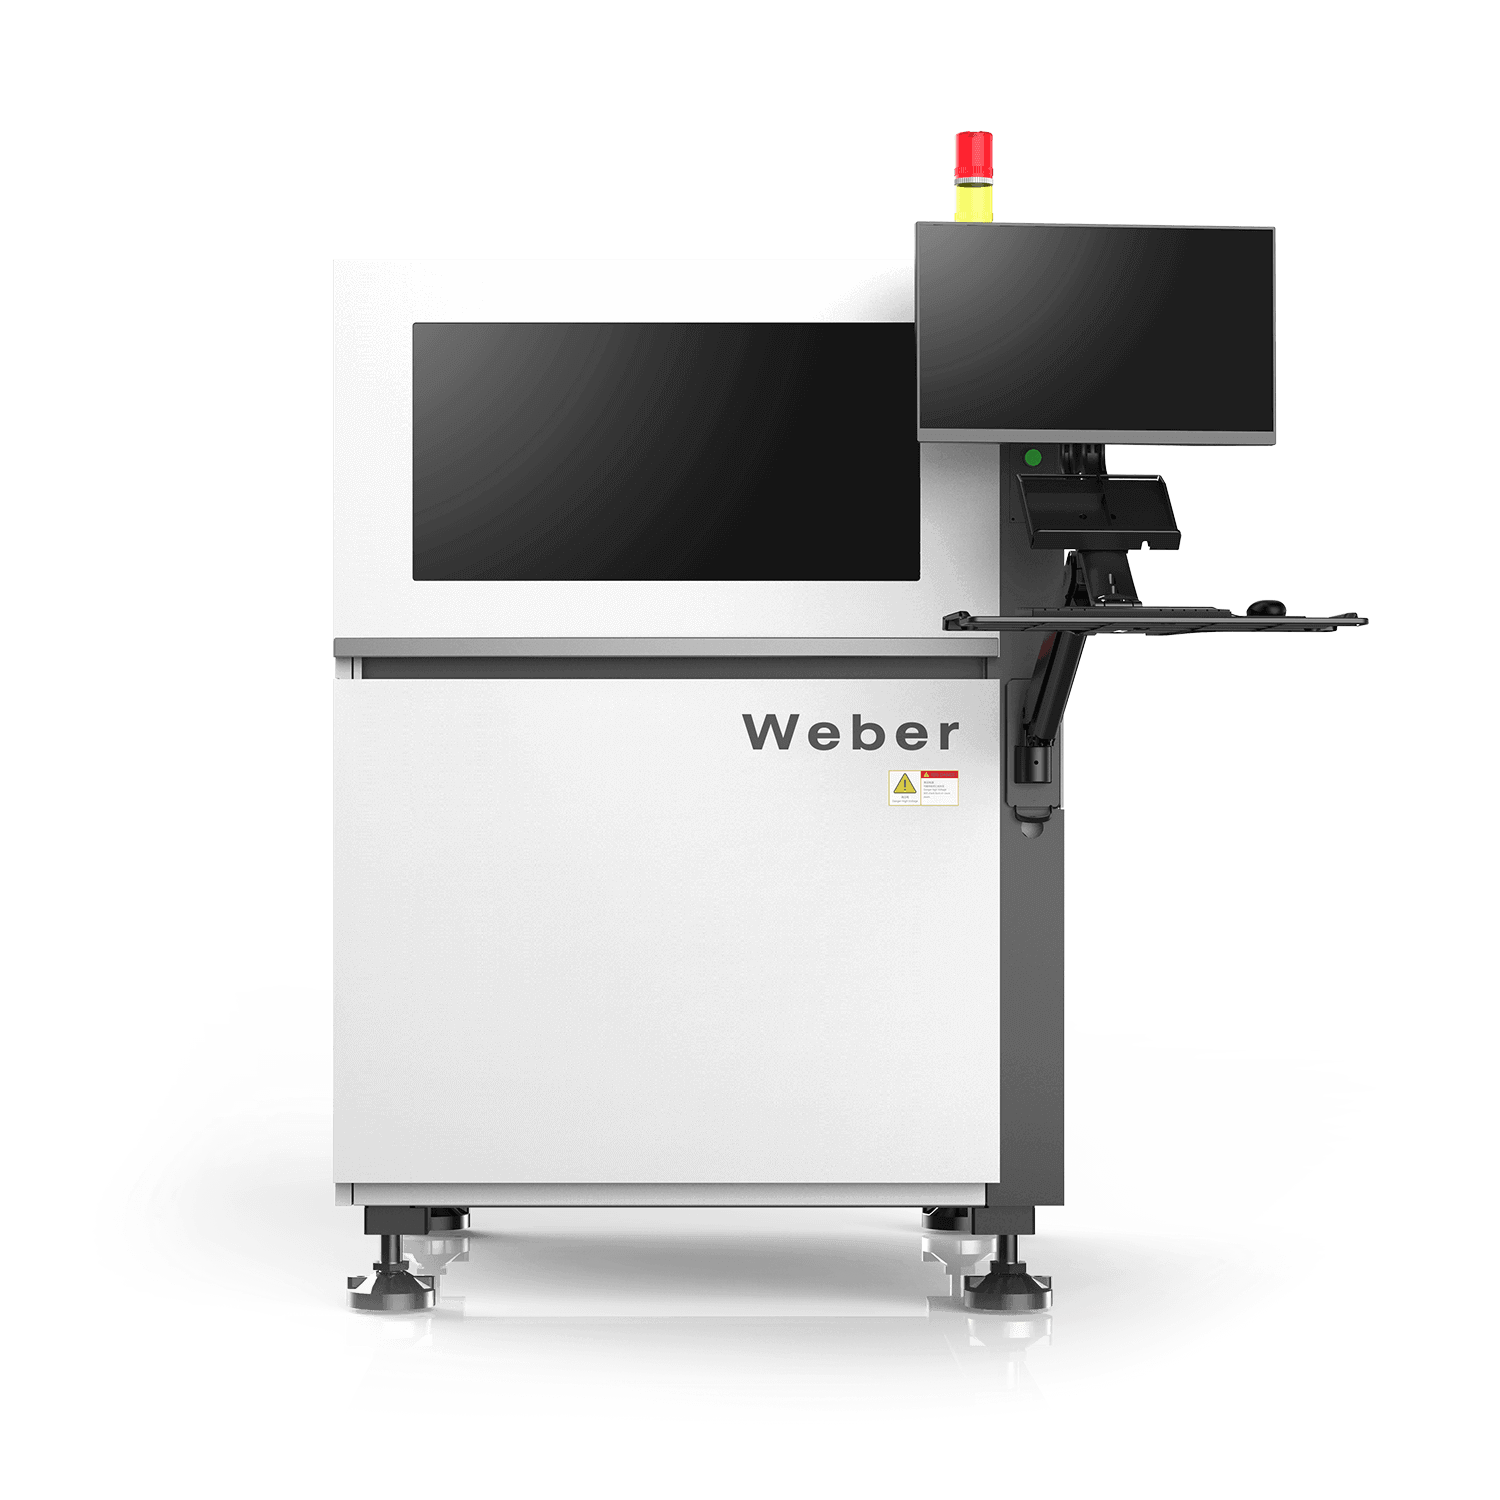 Weber series products